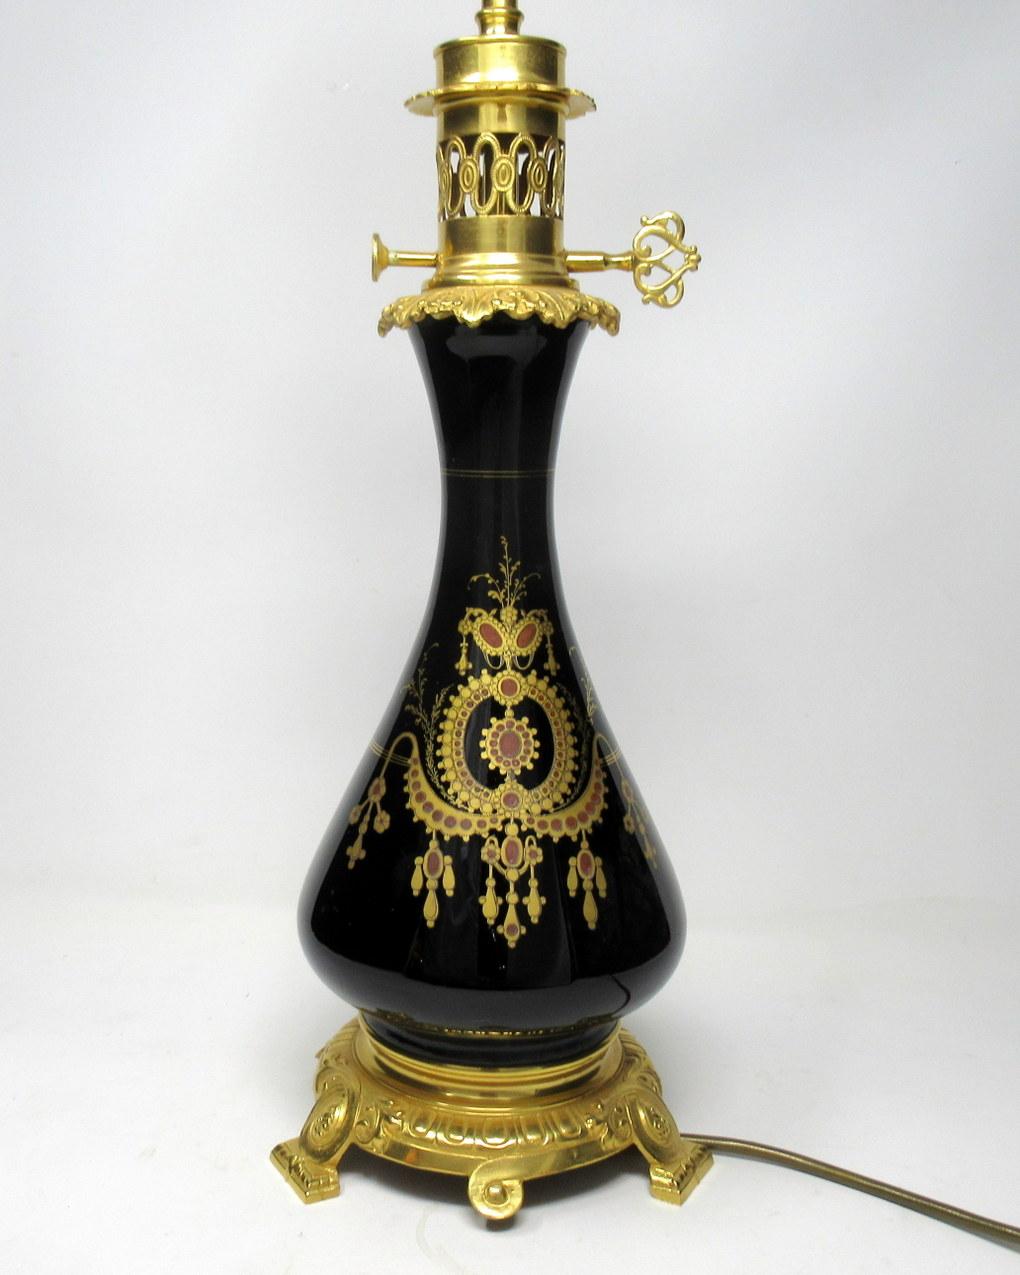 Early Victorian Pair of French Black Enameled Glass Ormolu Table Lamps Art Nouveau, 19th Century